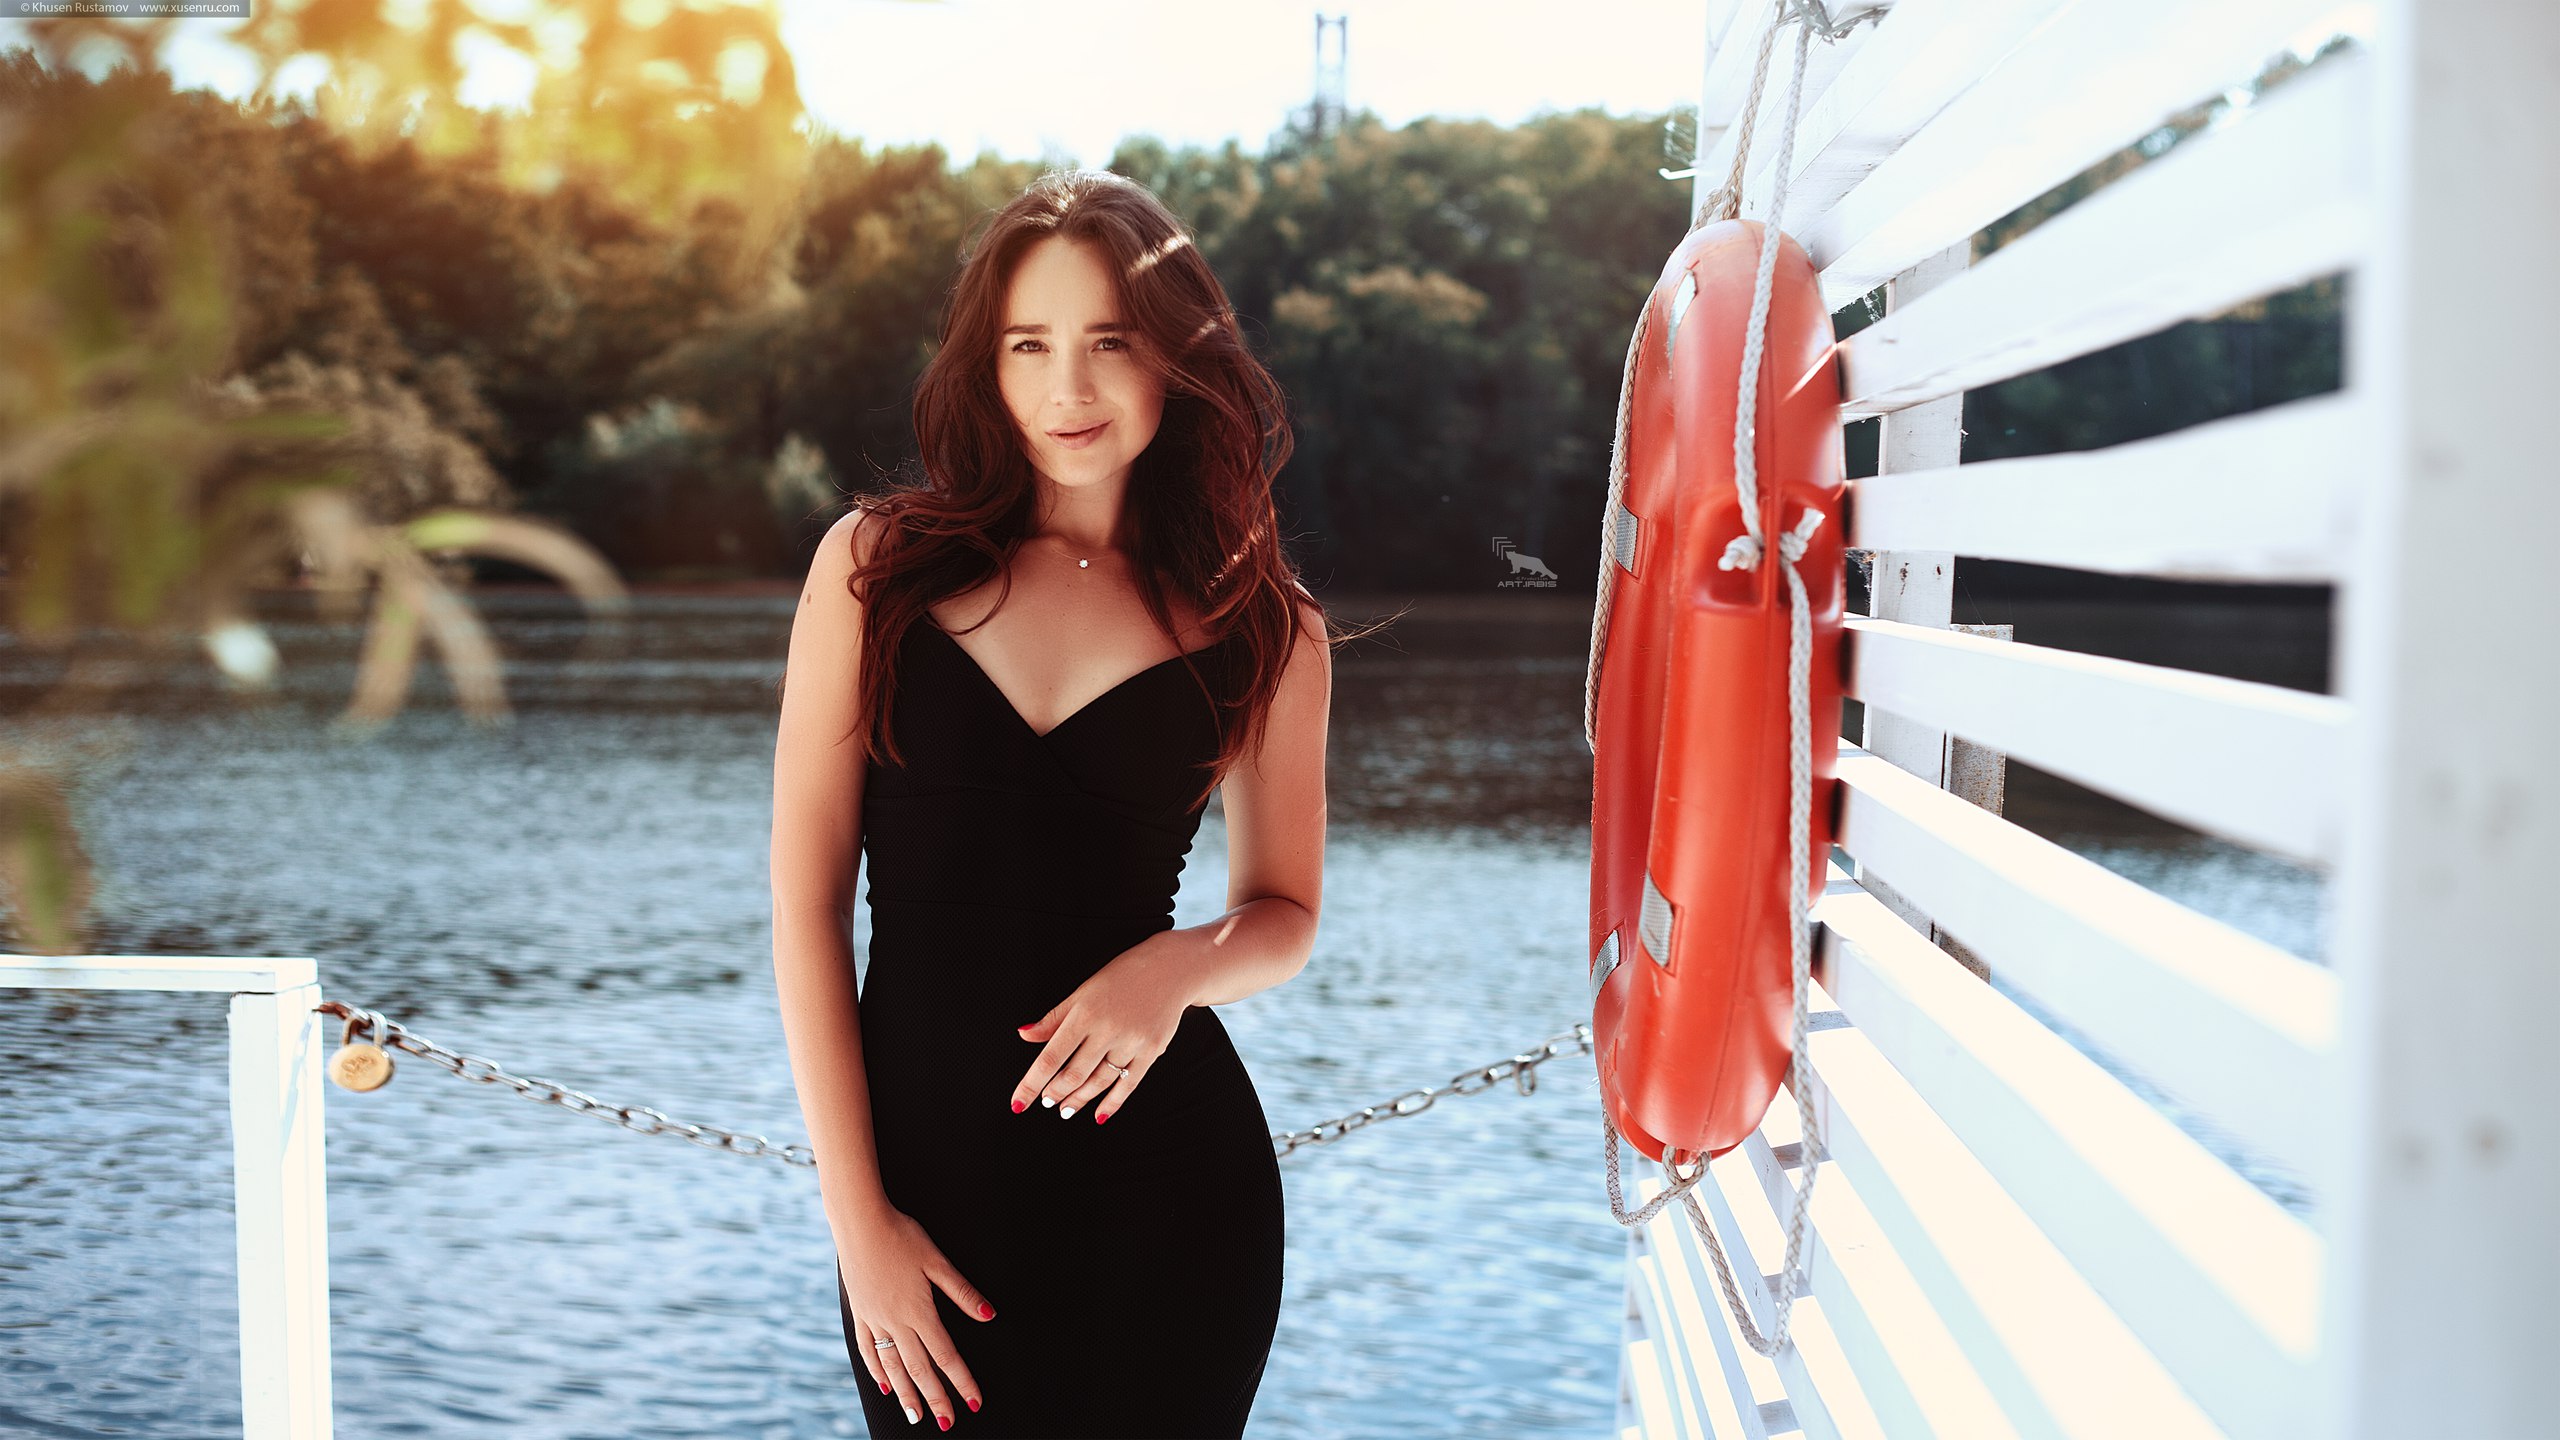 People 2560x1440 women smiling red nails river cleavage black dress tight dress women outdoors life preserver black clothing urban dyed hair model painted nails looking at viewer dress